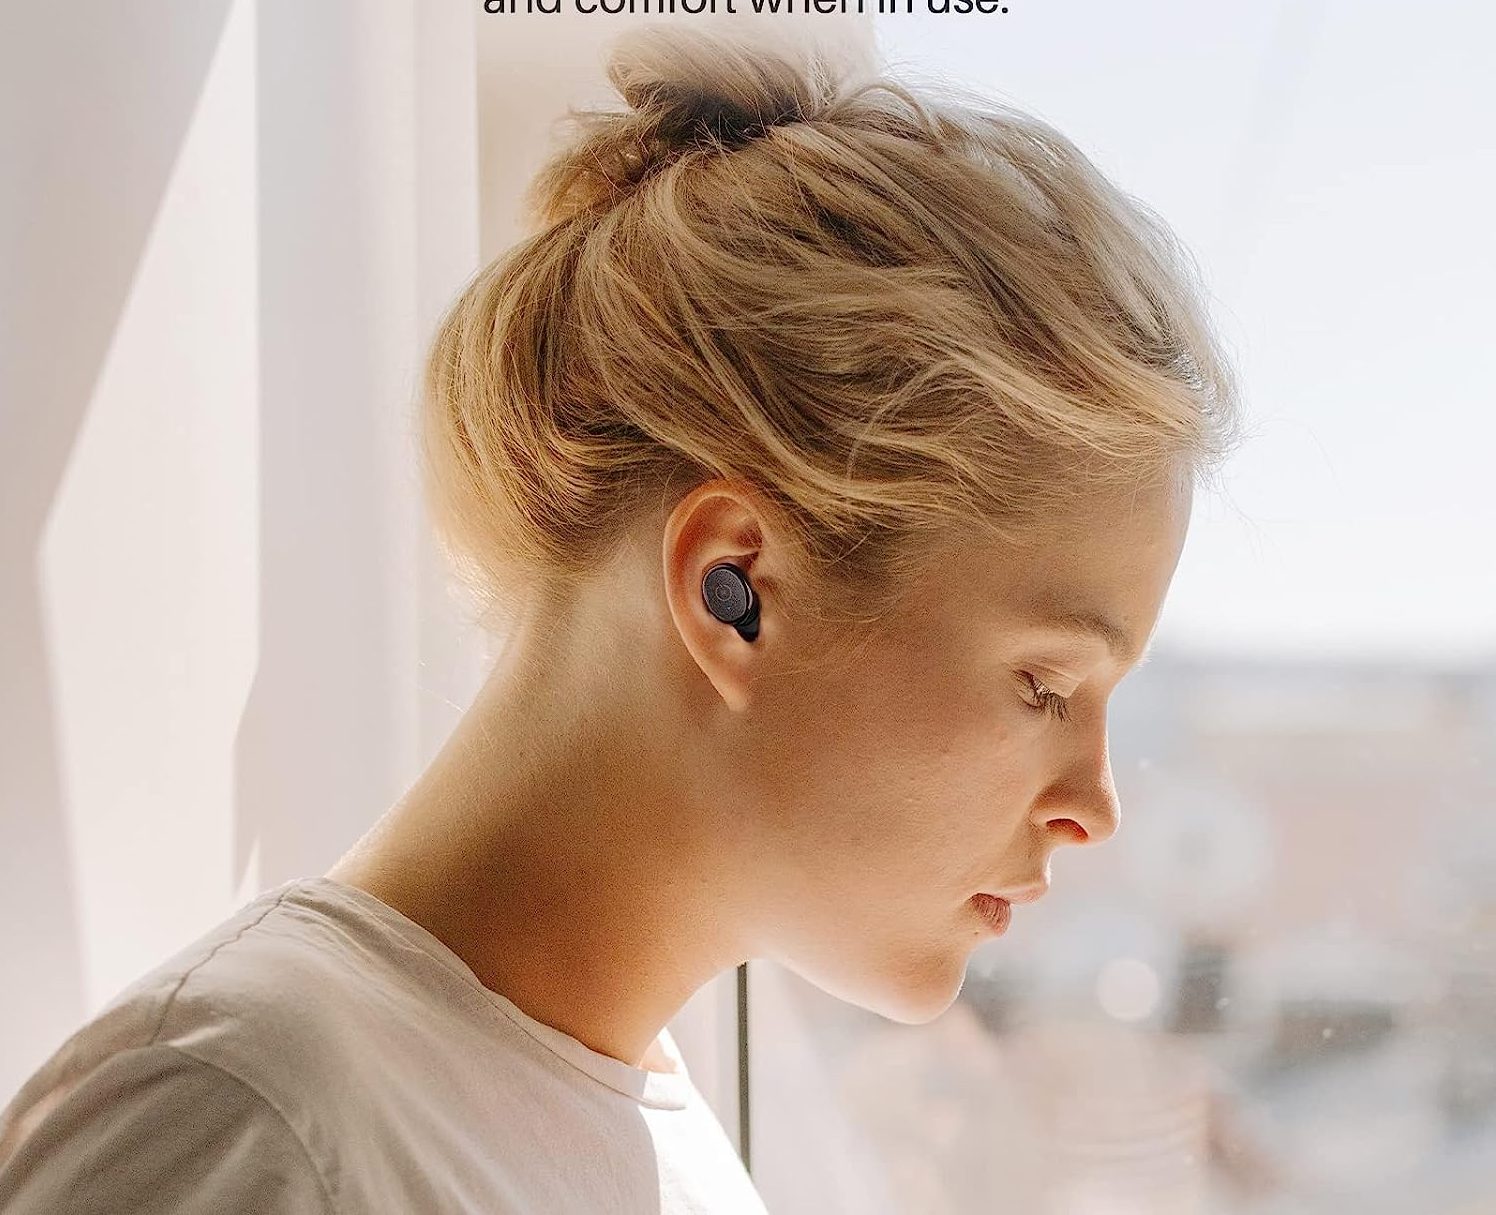 Tozo Earbuds: Your Sound Oasis